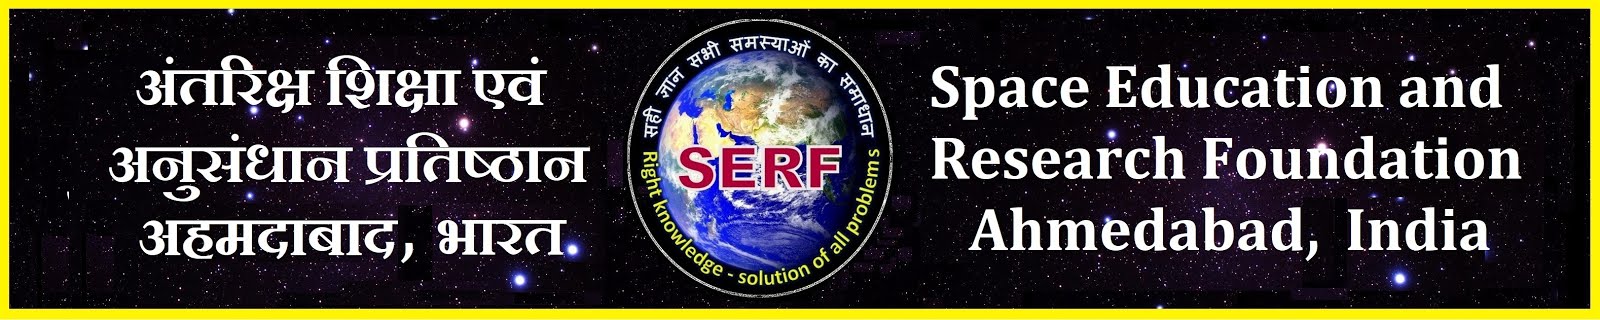 Space Education and Research Foundation